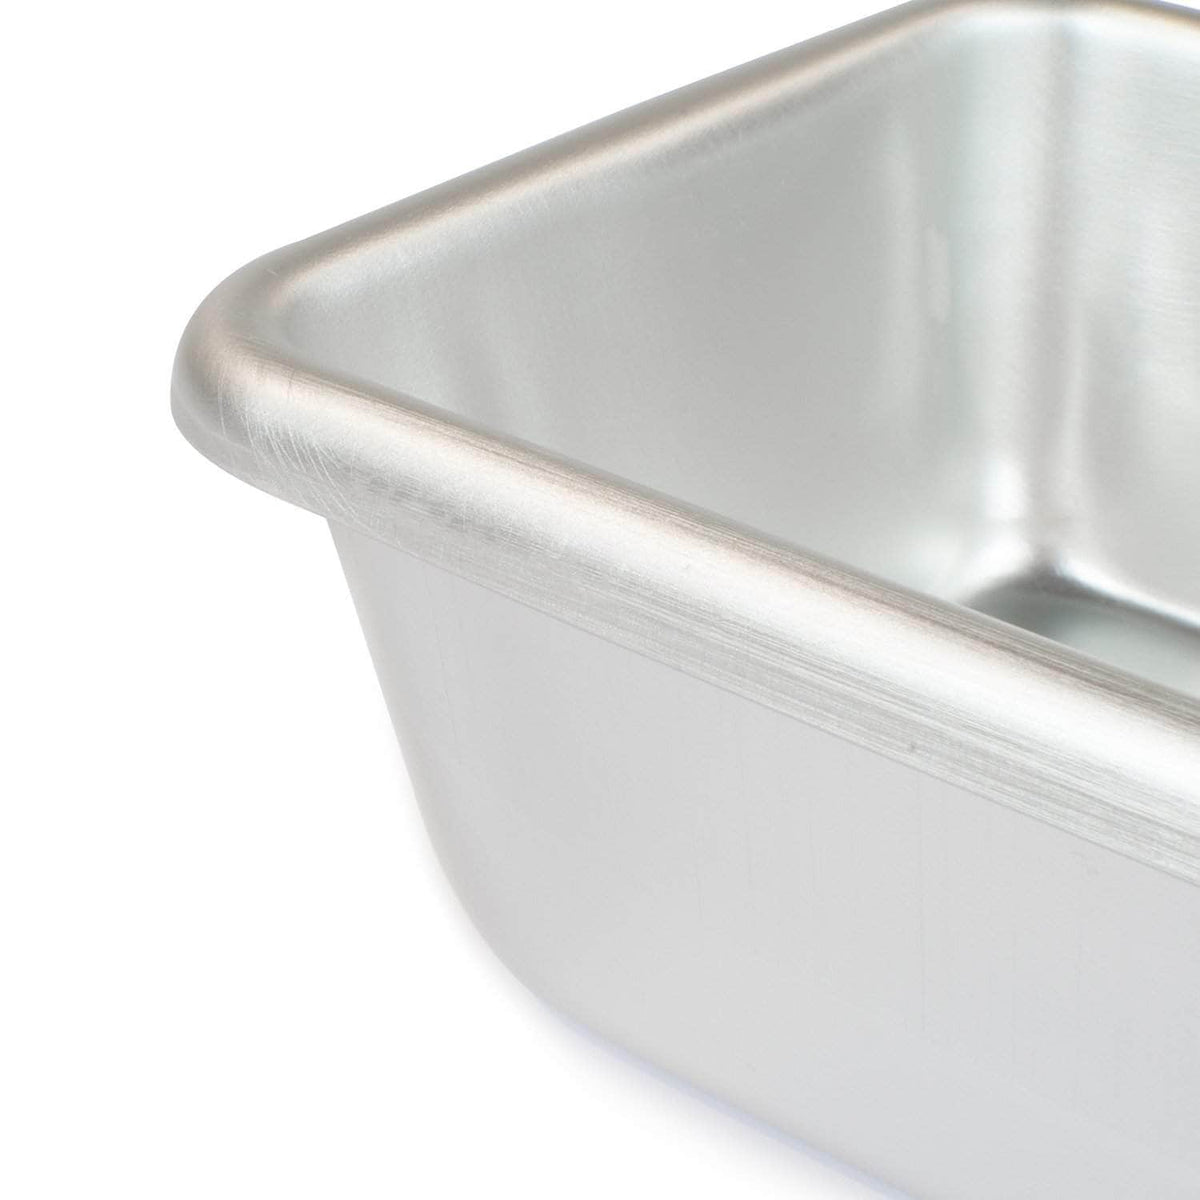 2lb silver anodised loaf tin with rounded corners